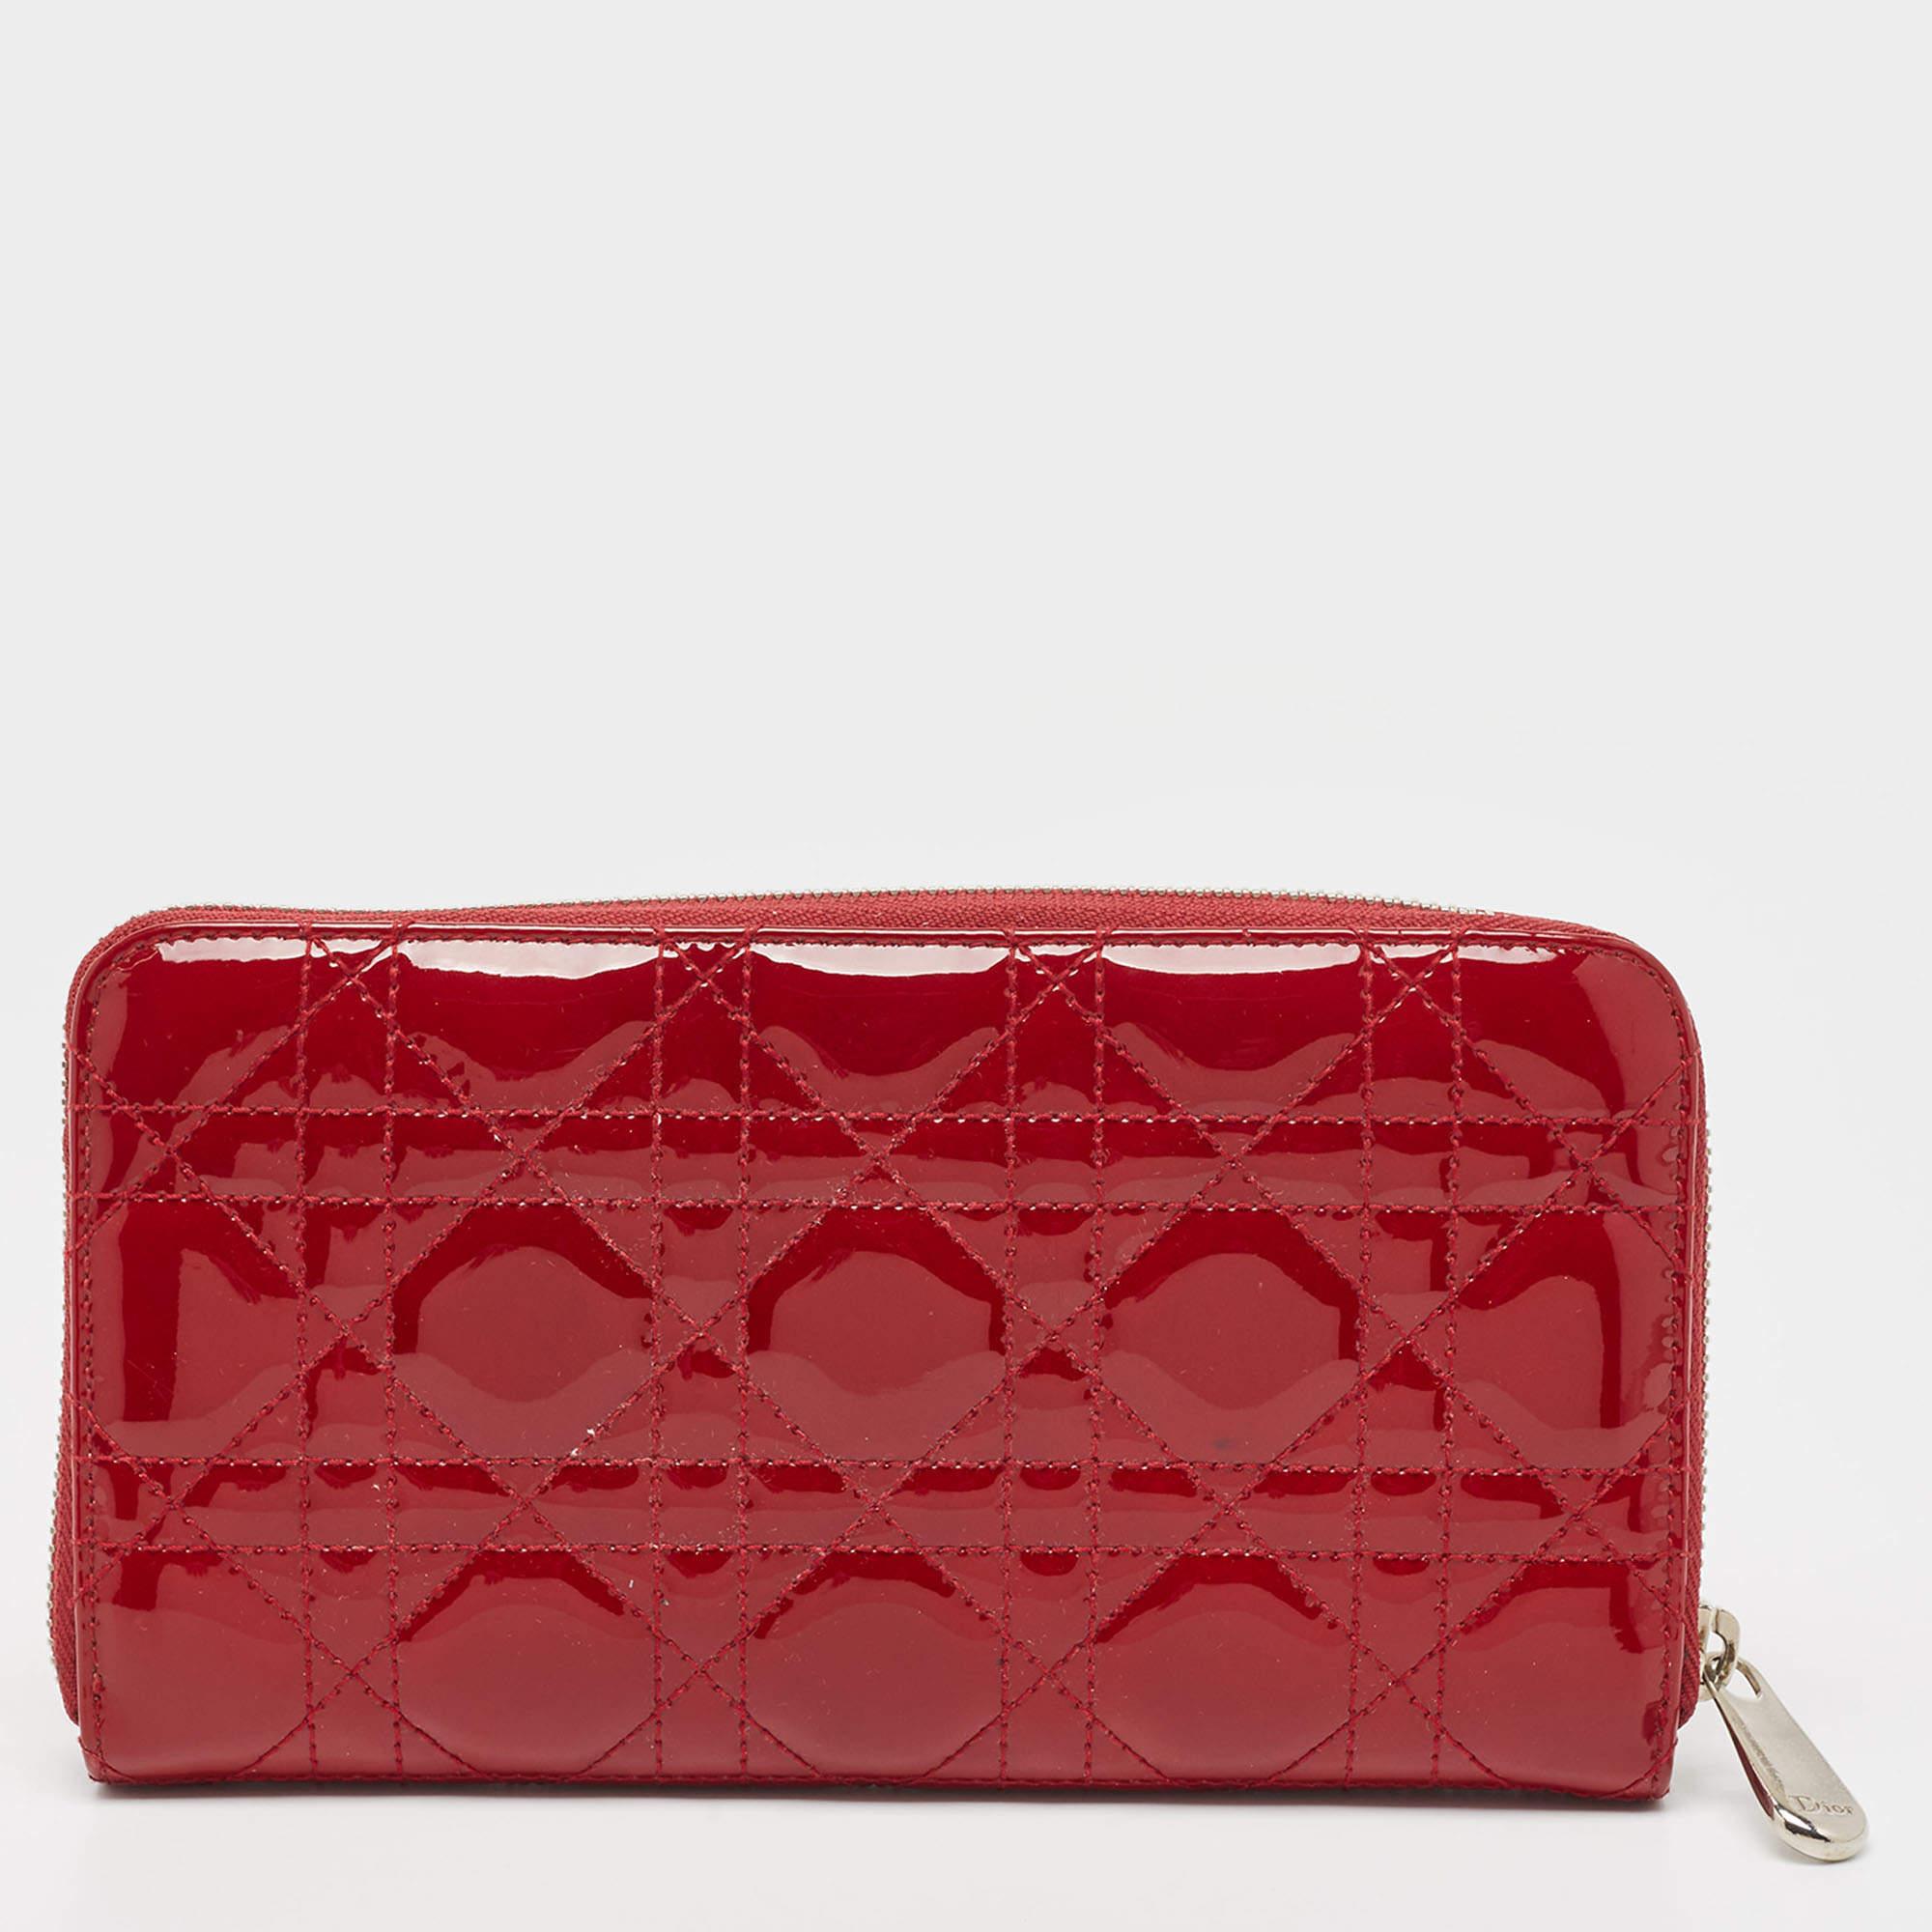 Elevate your everyday elegance with this Dior red wallet. Meticulously crafted from premium materials, it seamlessly blends style, functionality, and sophistication, making it a great pick.

